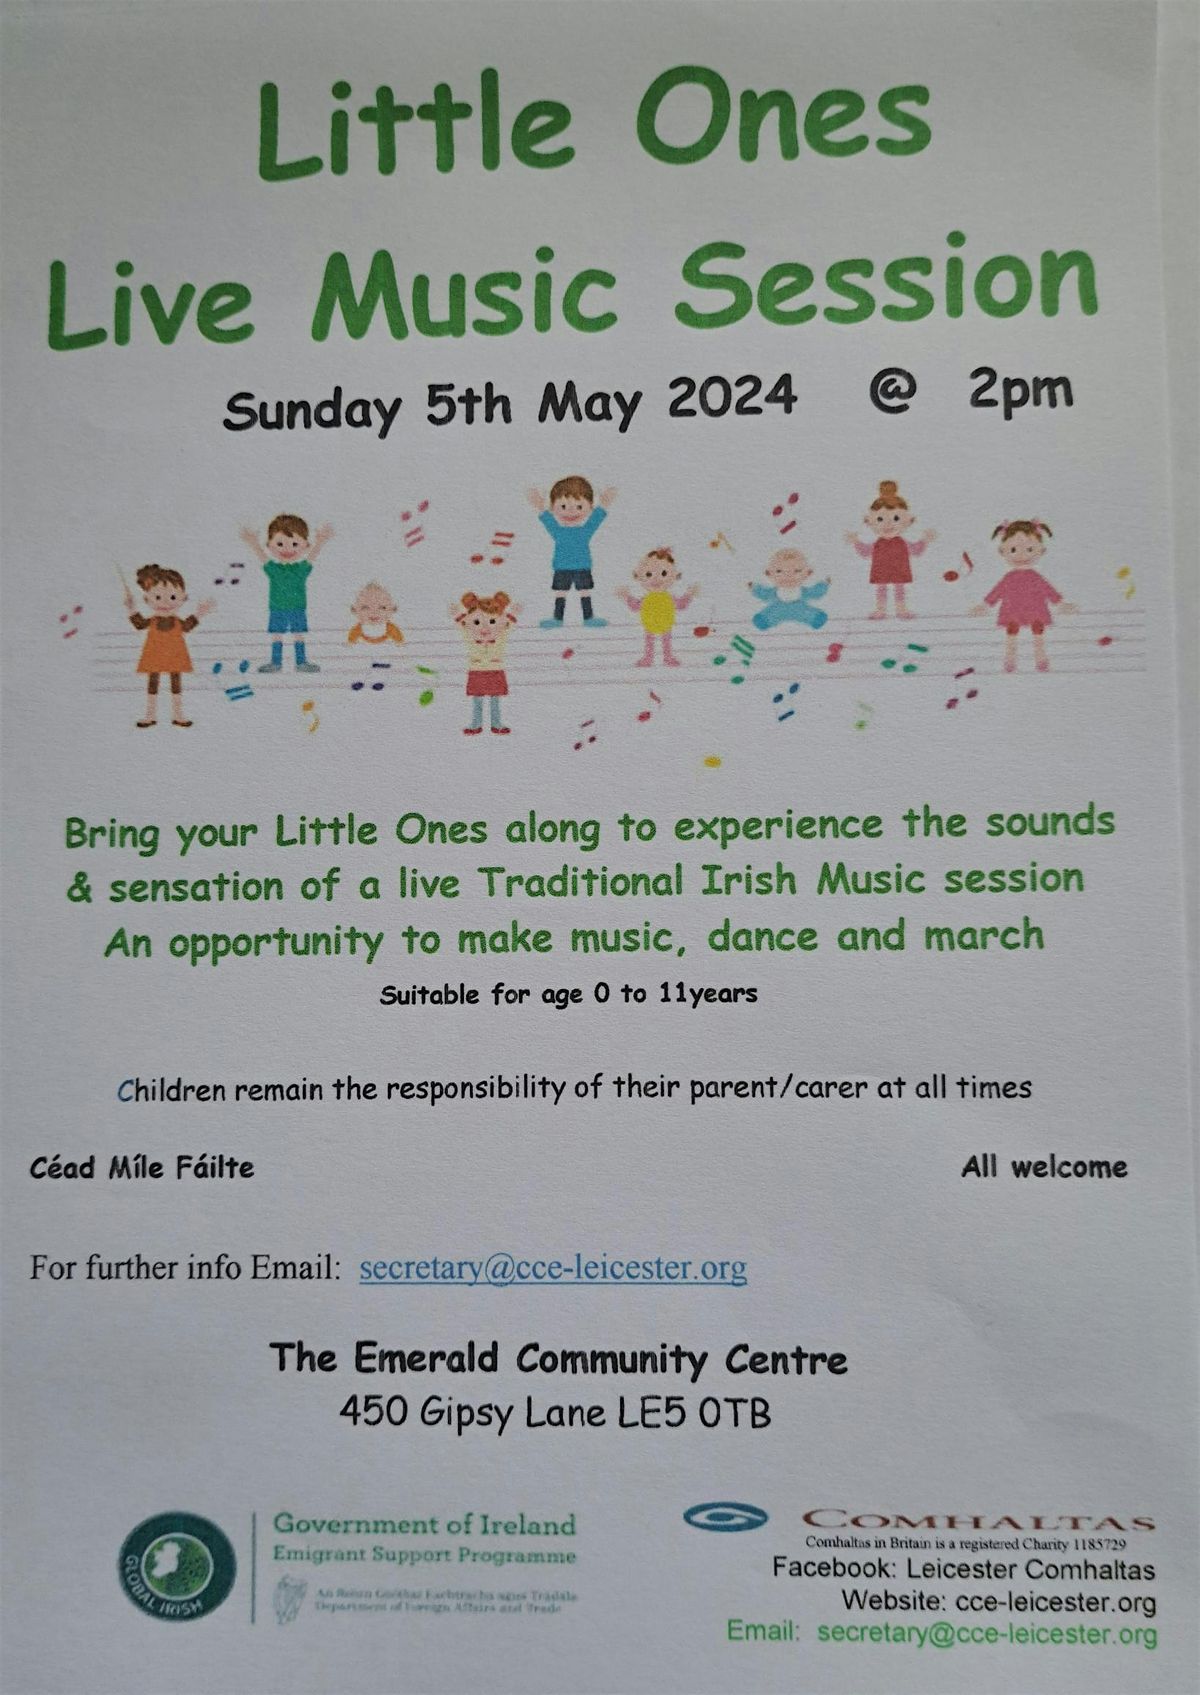 Little Ones experience a live Irish Music Session